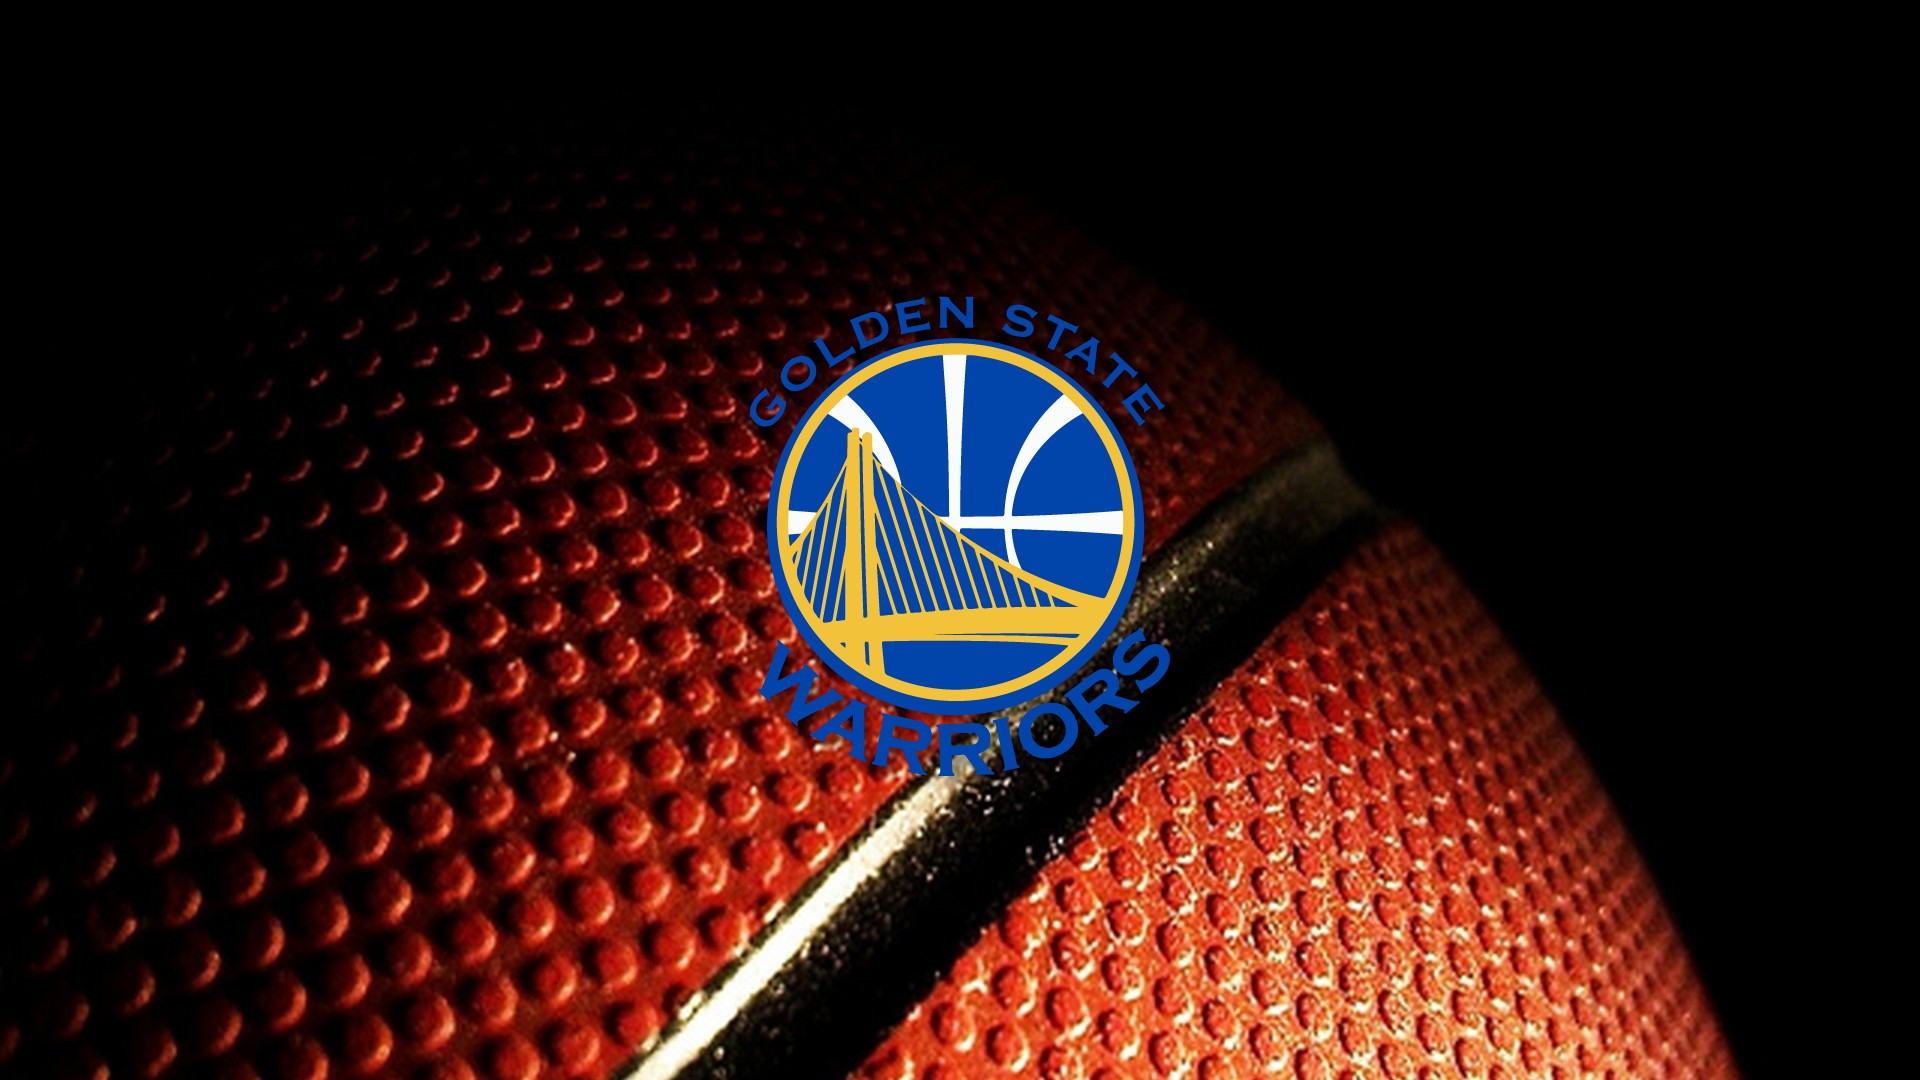 Windows Wallpaper Golden State Warriors NBA with image dimensions 1920x1080 pixel. You can make this wallpaper for your Desktop Computer Backgrounds, Windows or Mac Screensavers, iPhone Lock screen, Tablet or Android and another Mobile Phone device